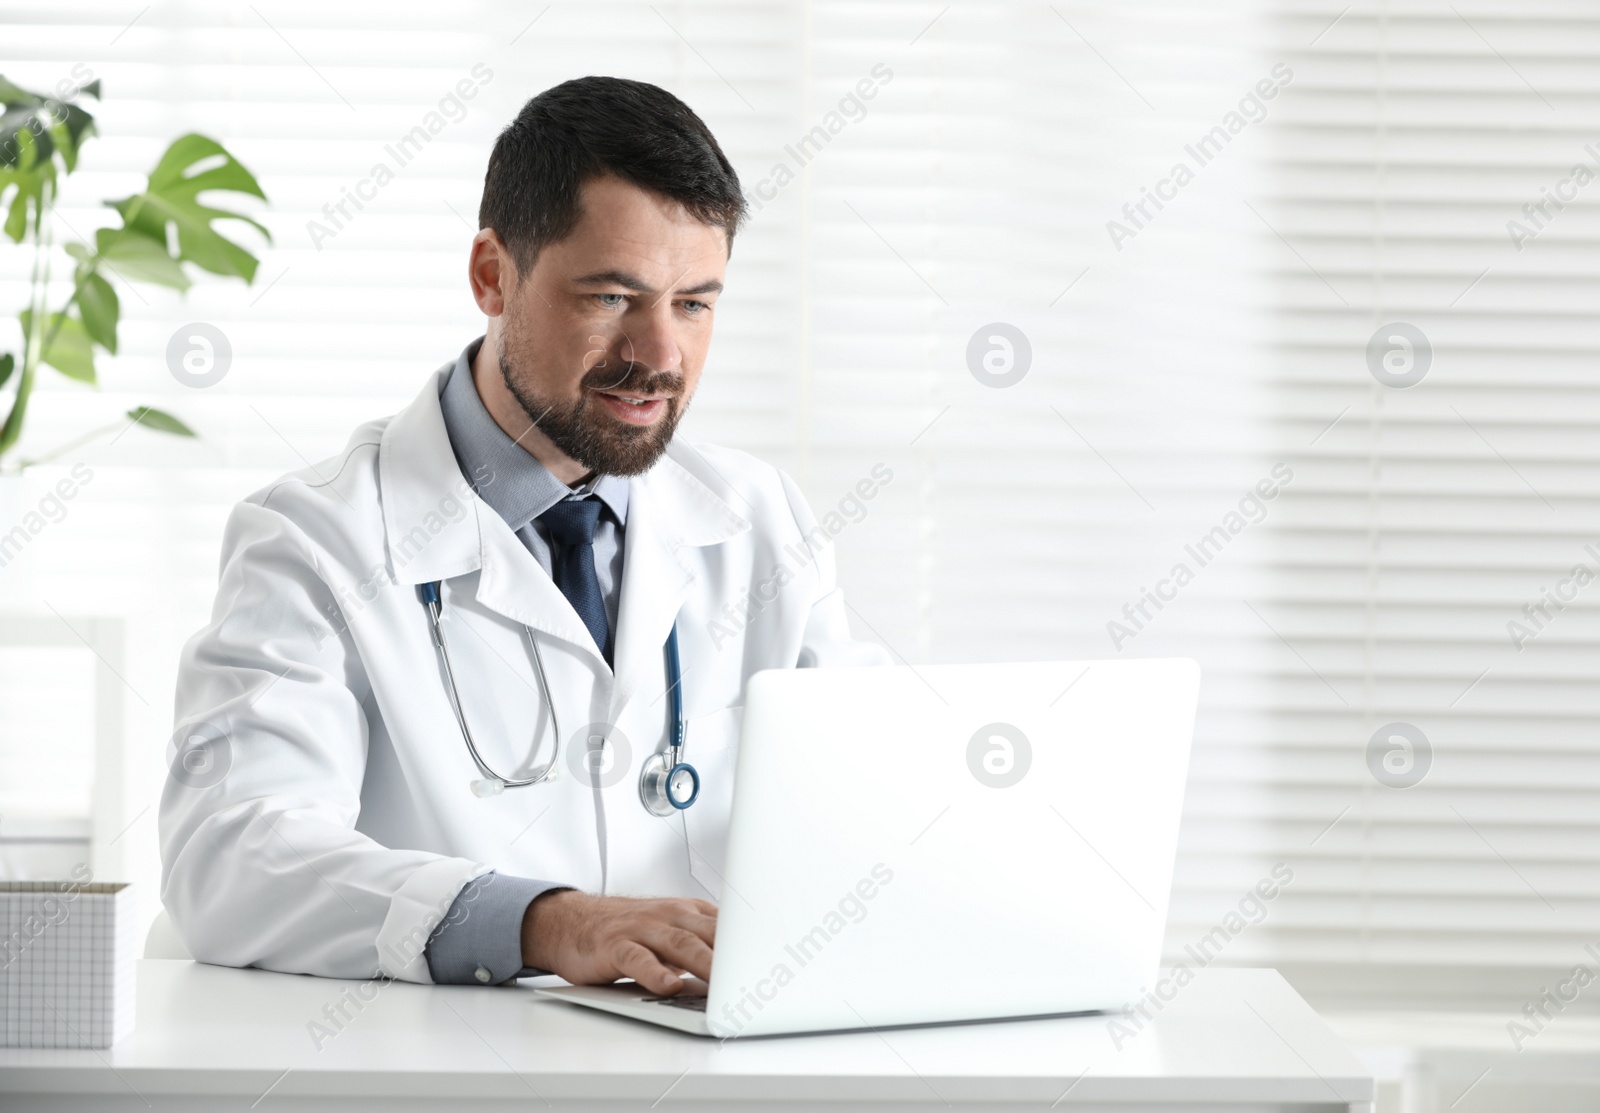 Photo of Male doctor working with laptop at table in office